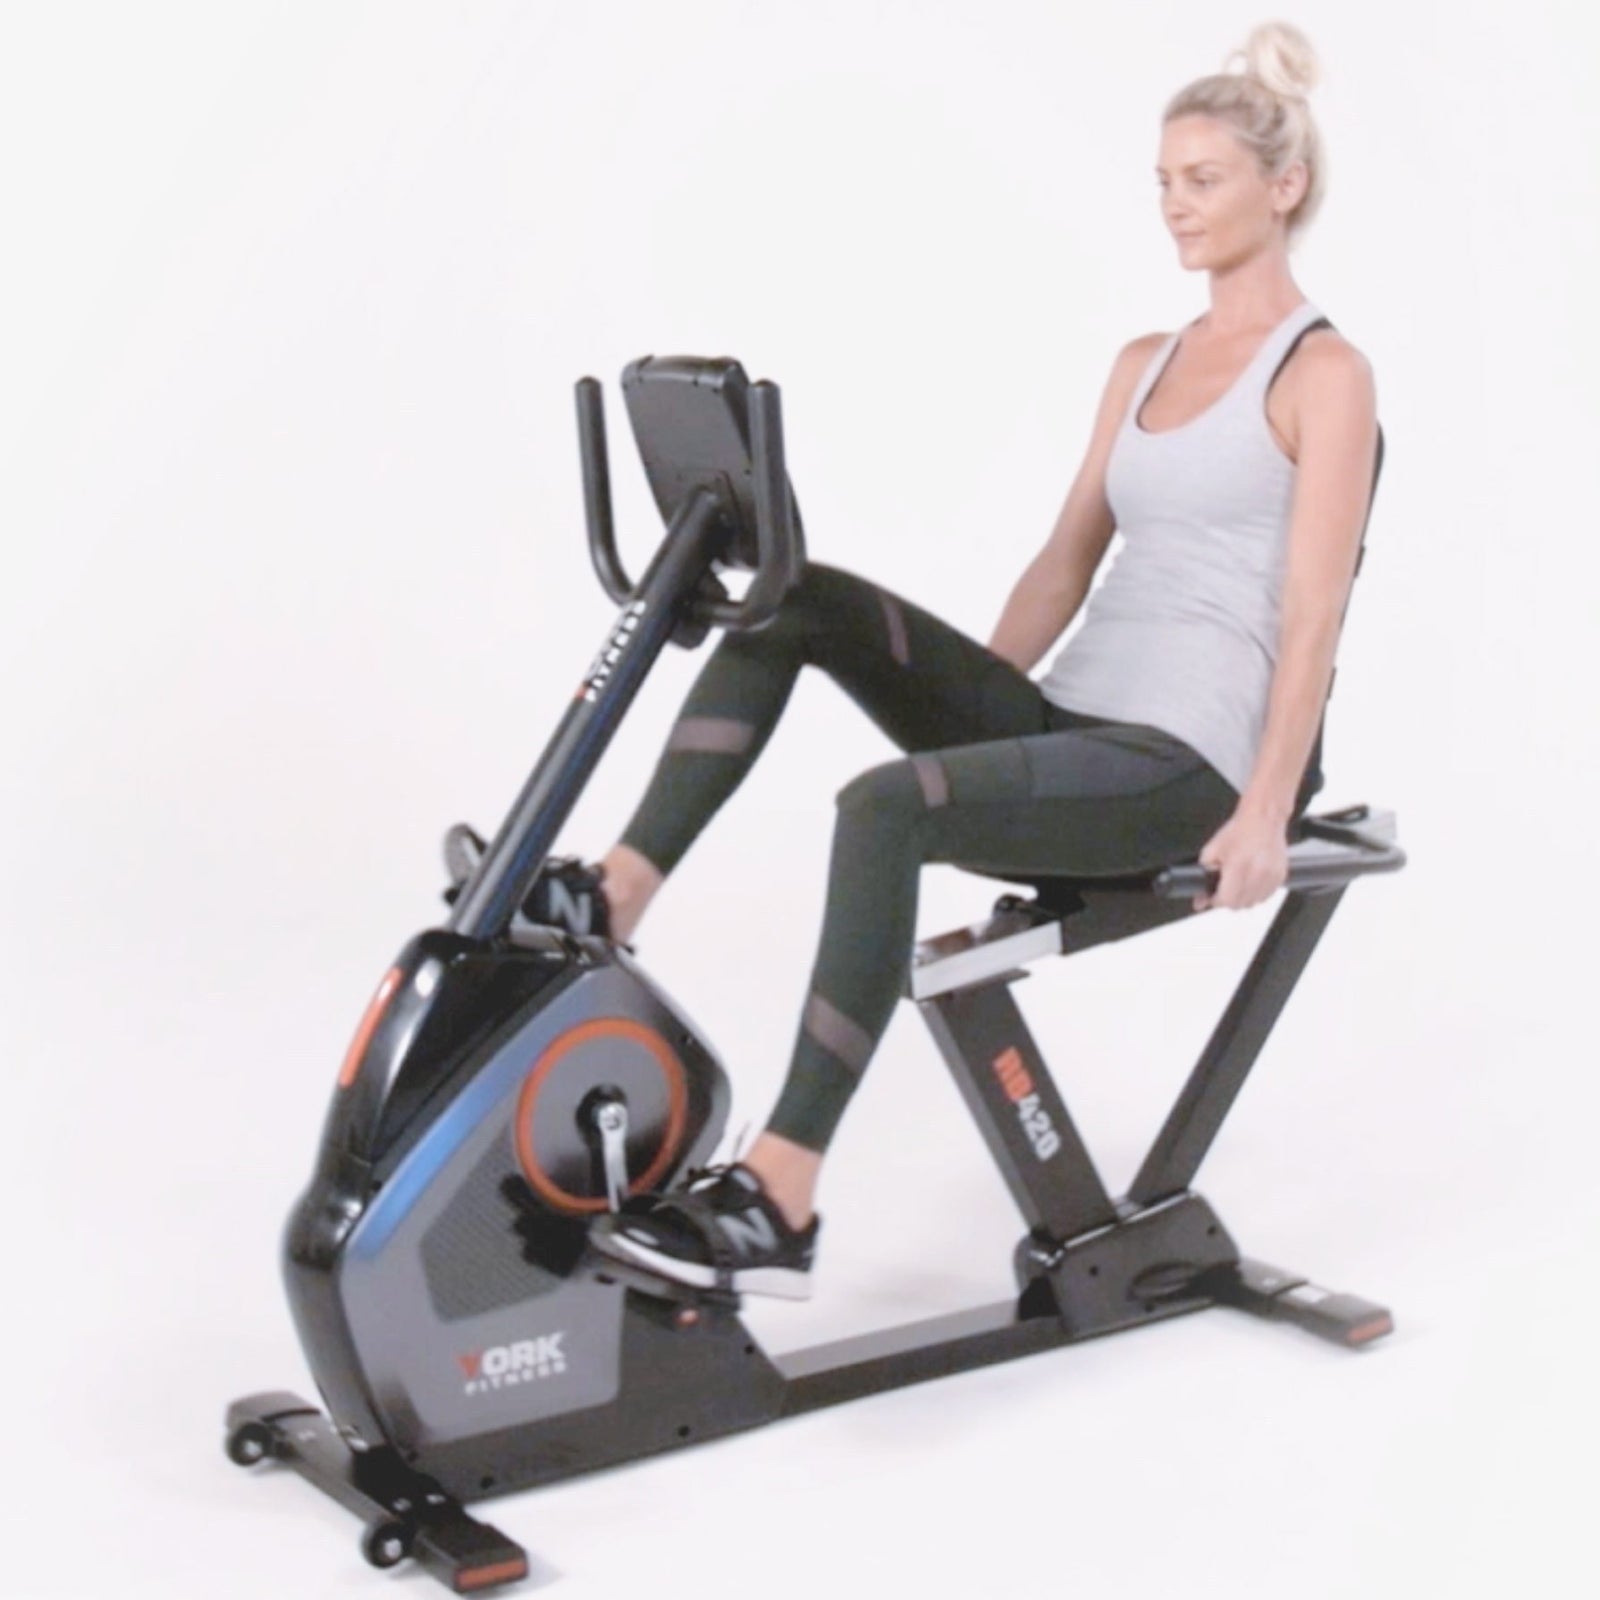 york rb420 recumbent bike side view with woman